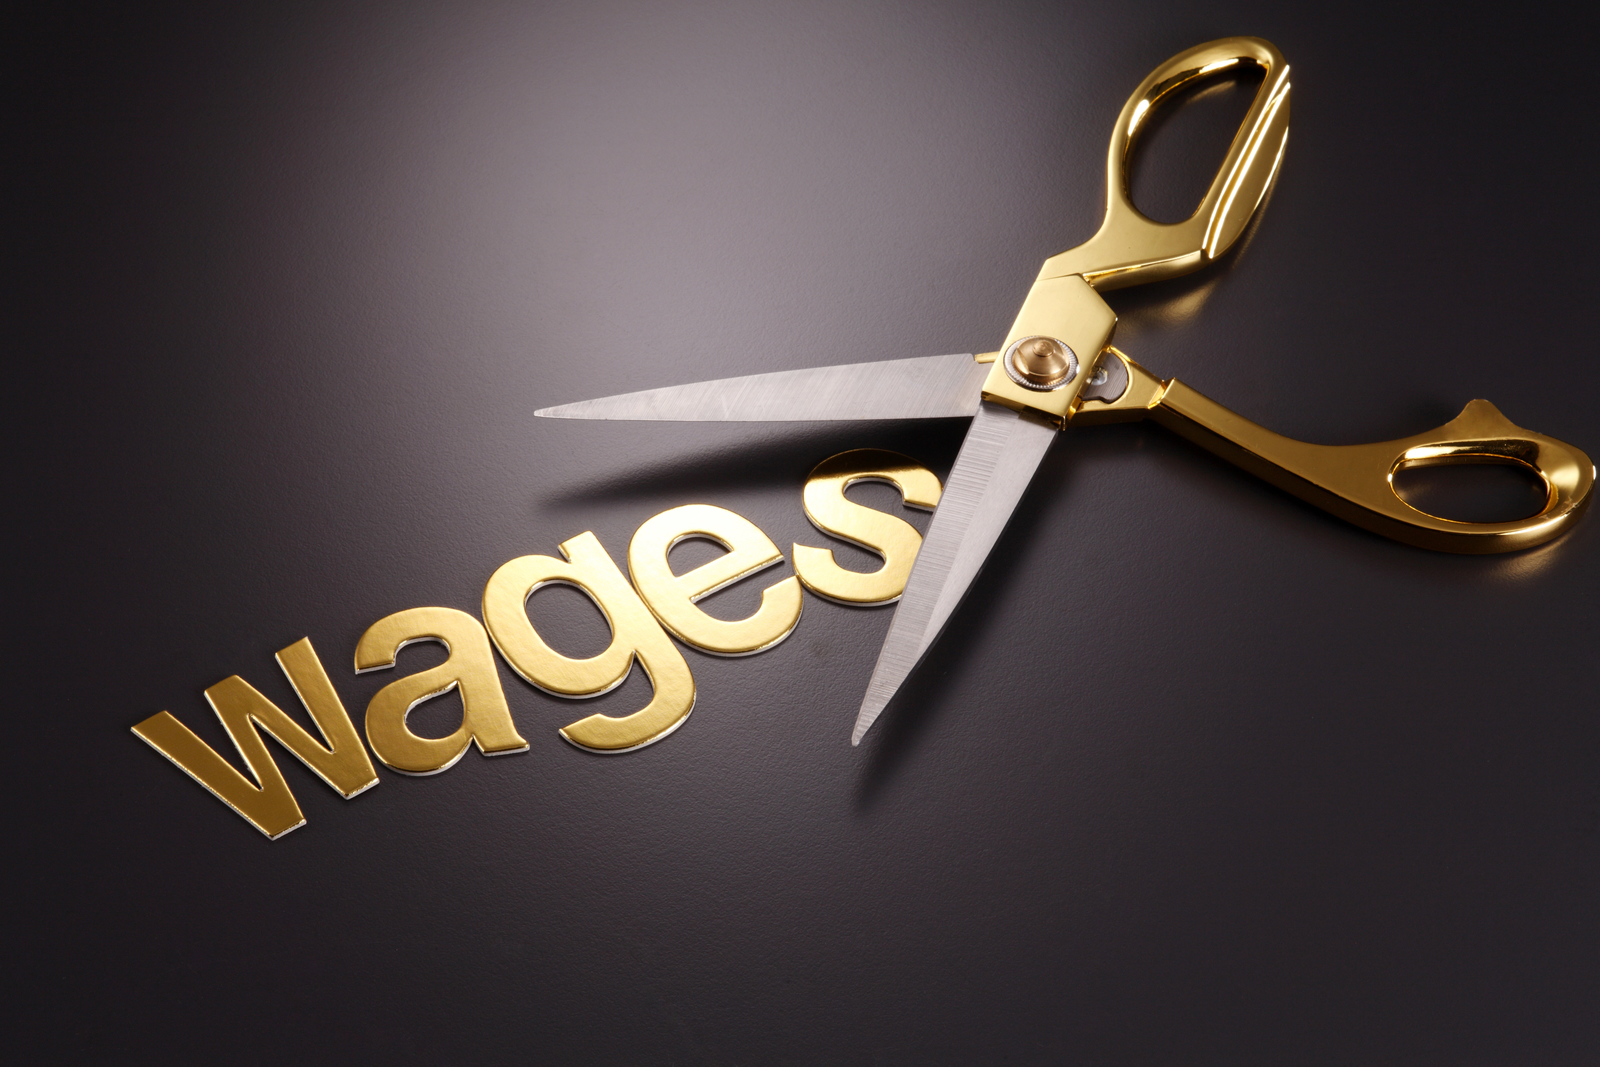 Wages